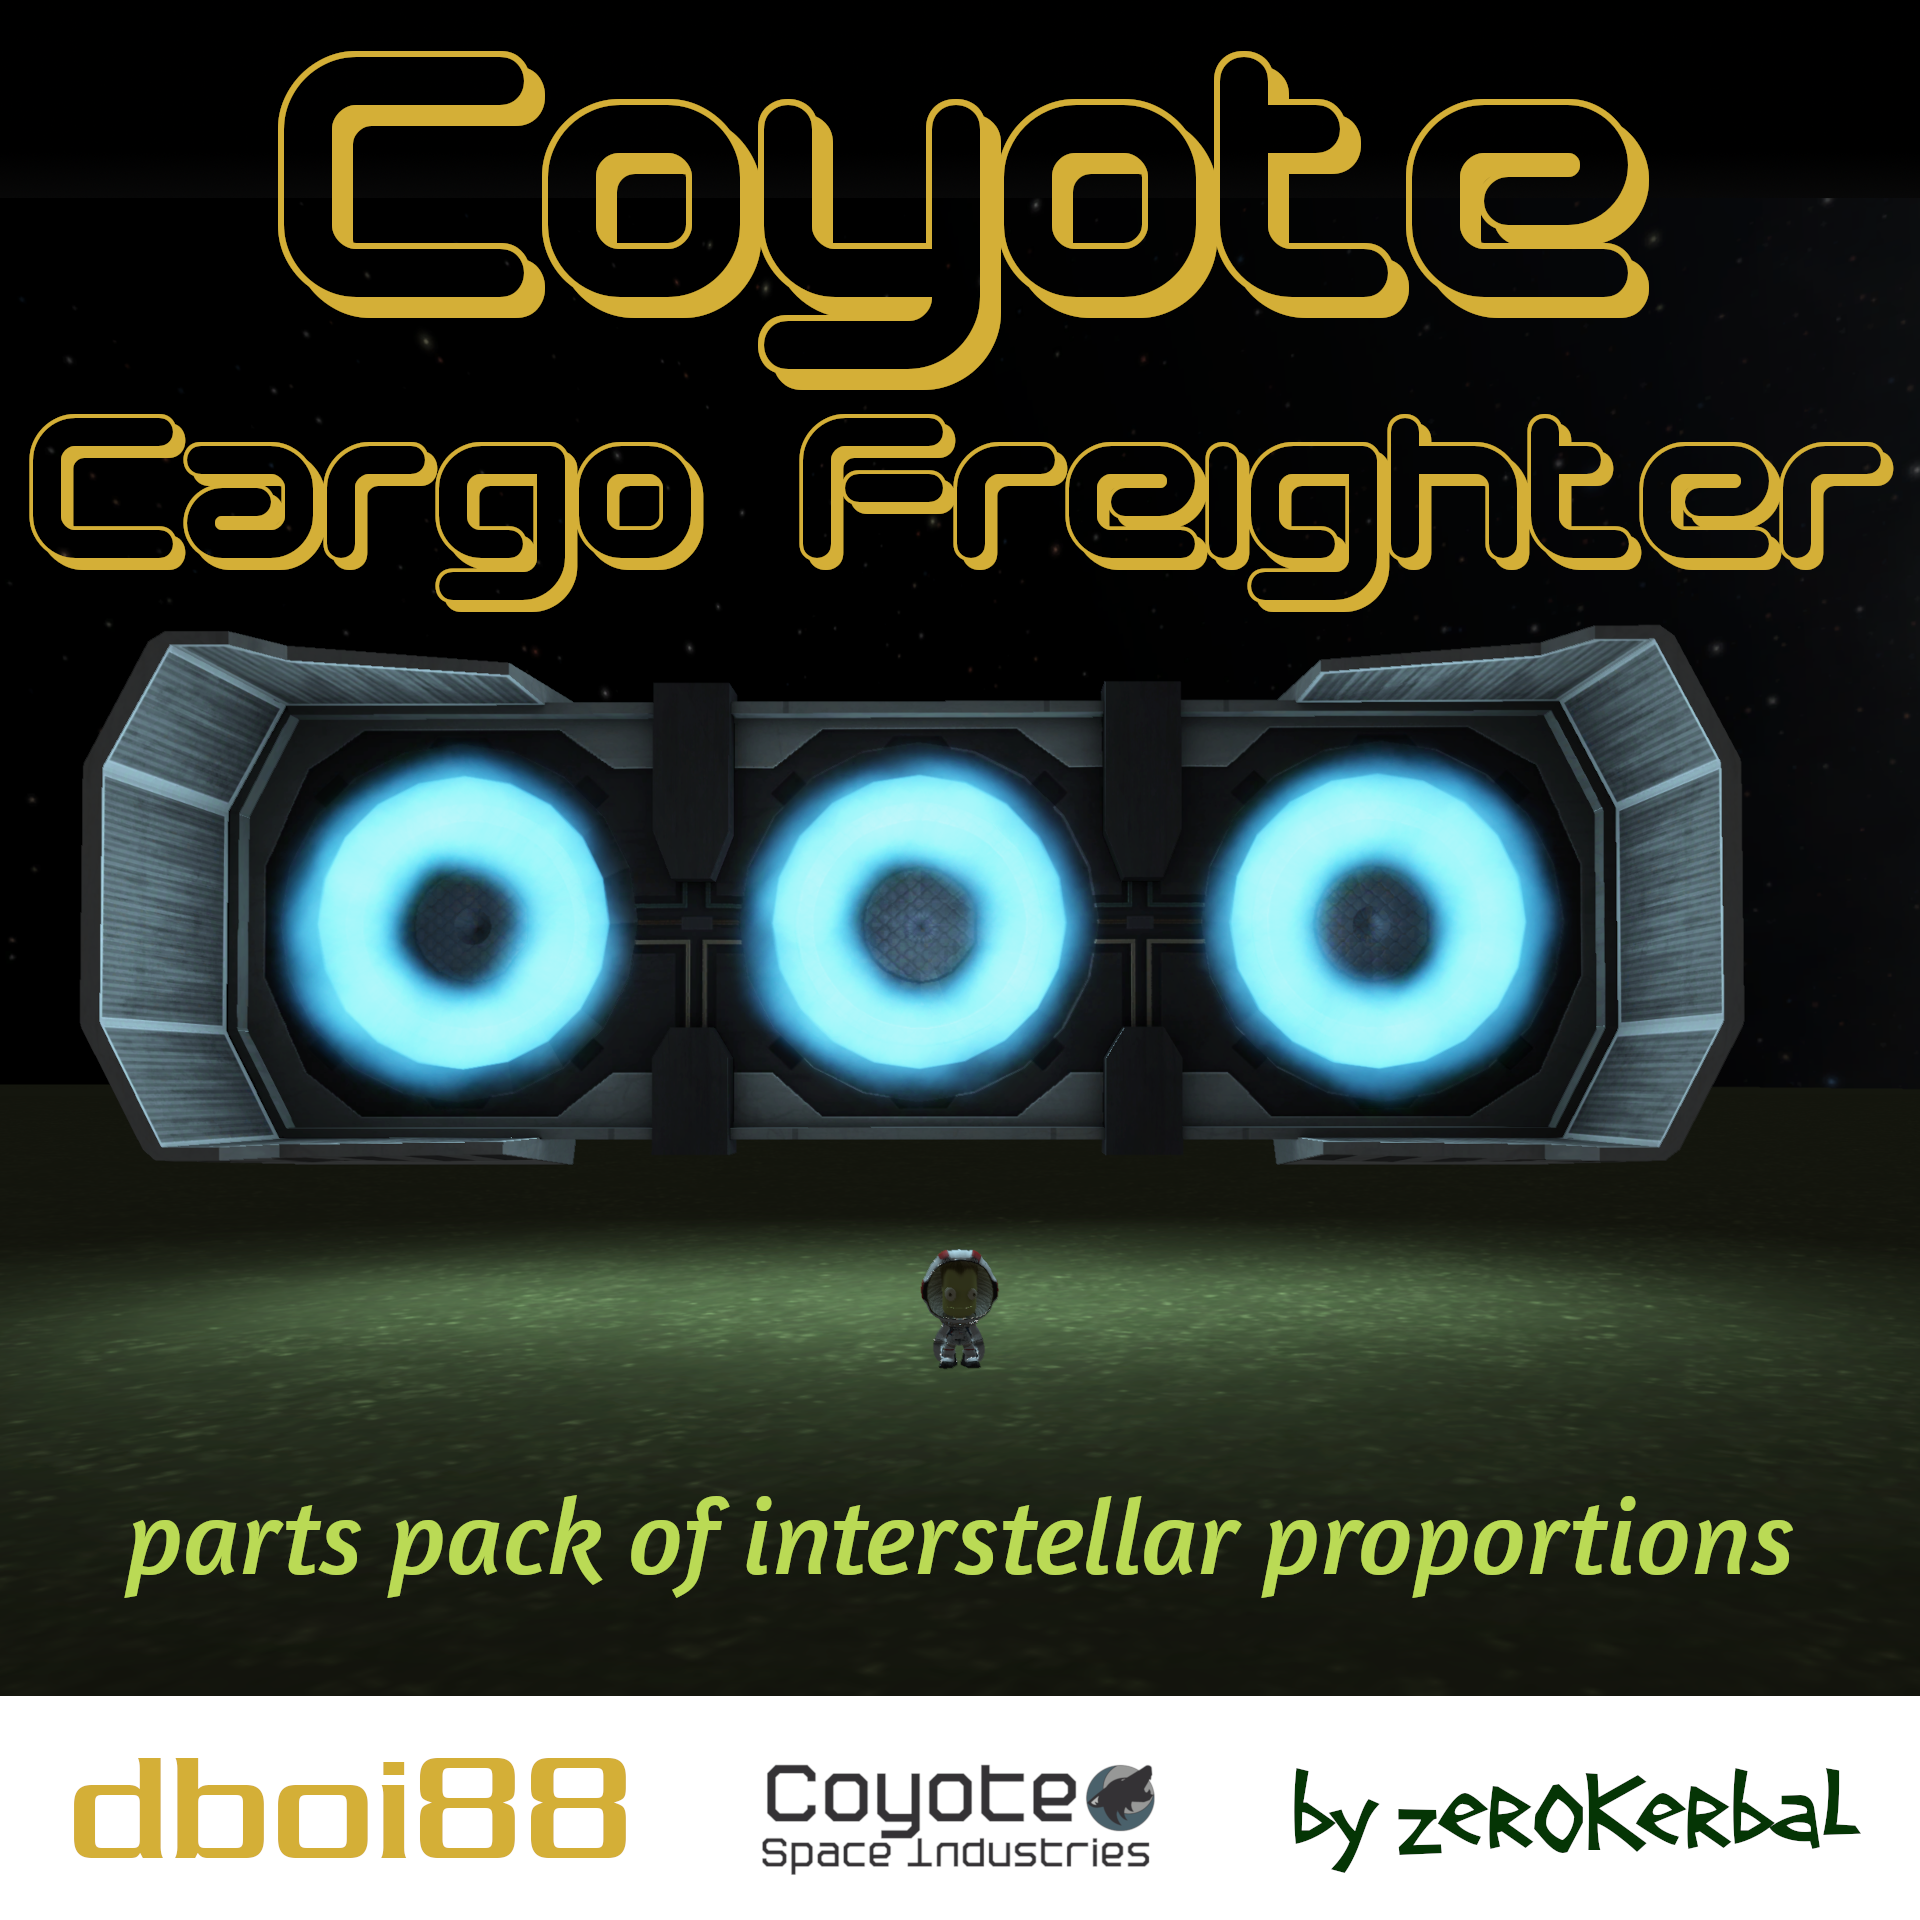 Coyote Cargo Freighter by Coyote Space Industries project avatar